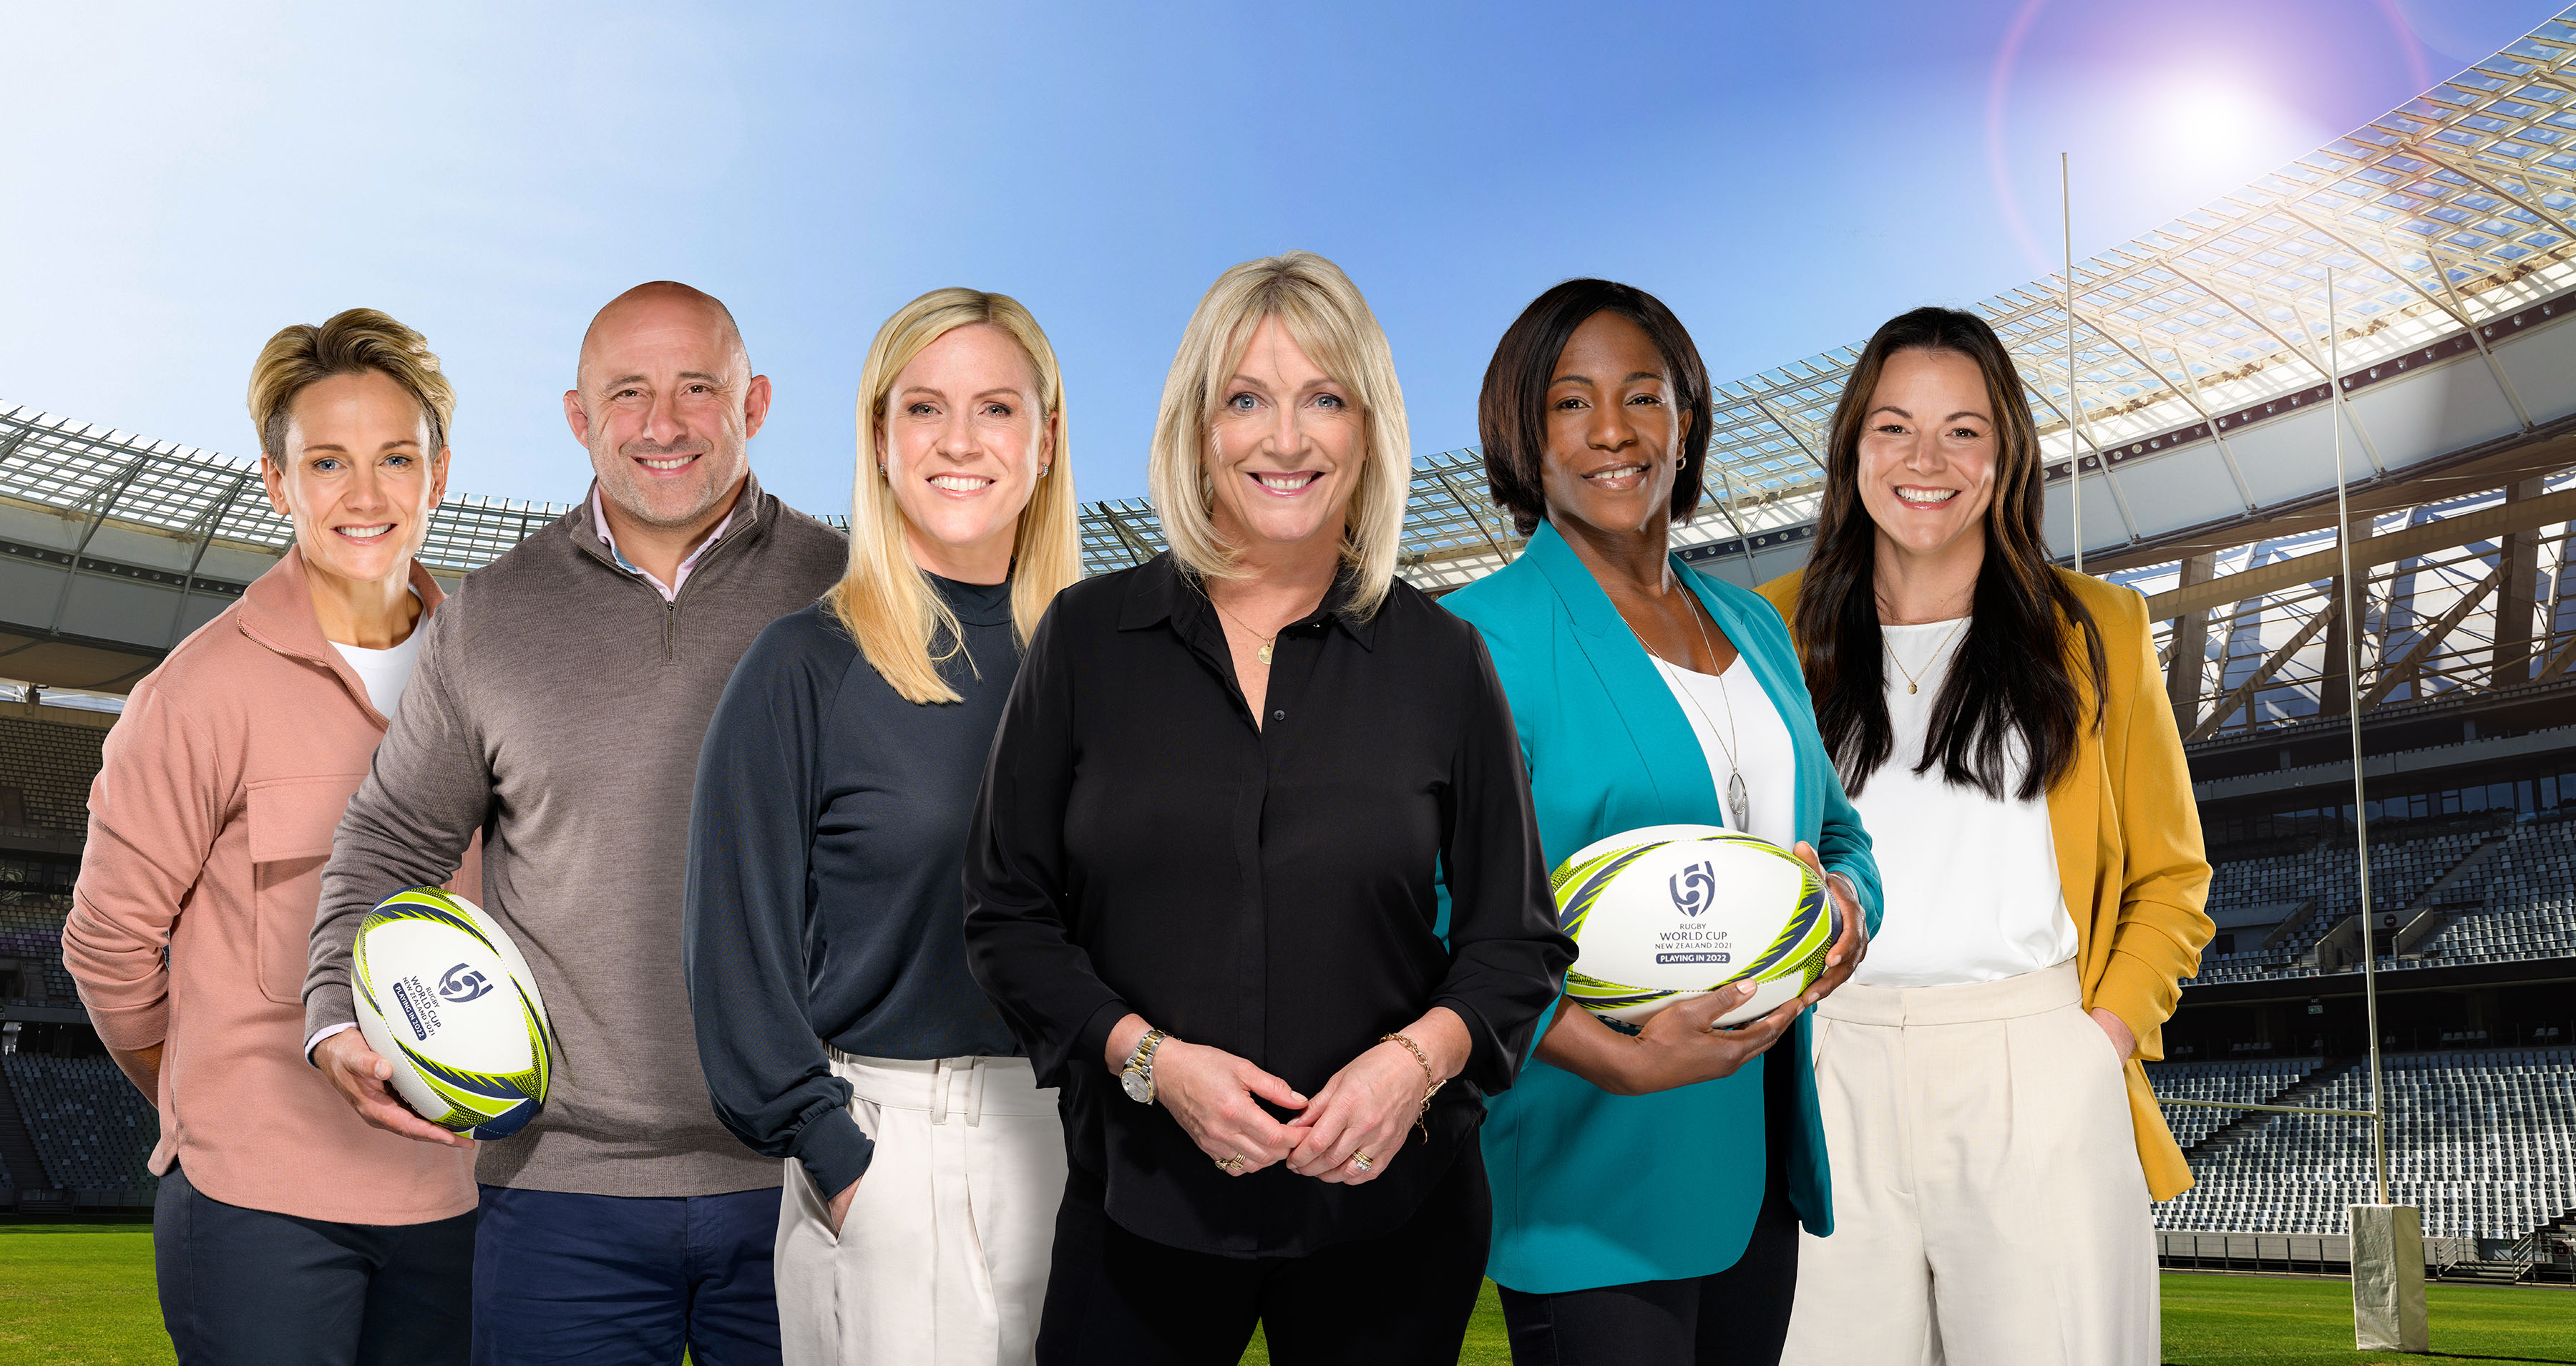 The Womens Rugby World Cup on ITV The home of Rugby on ITV